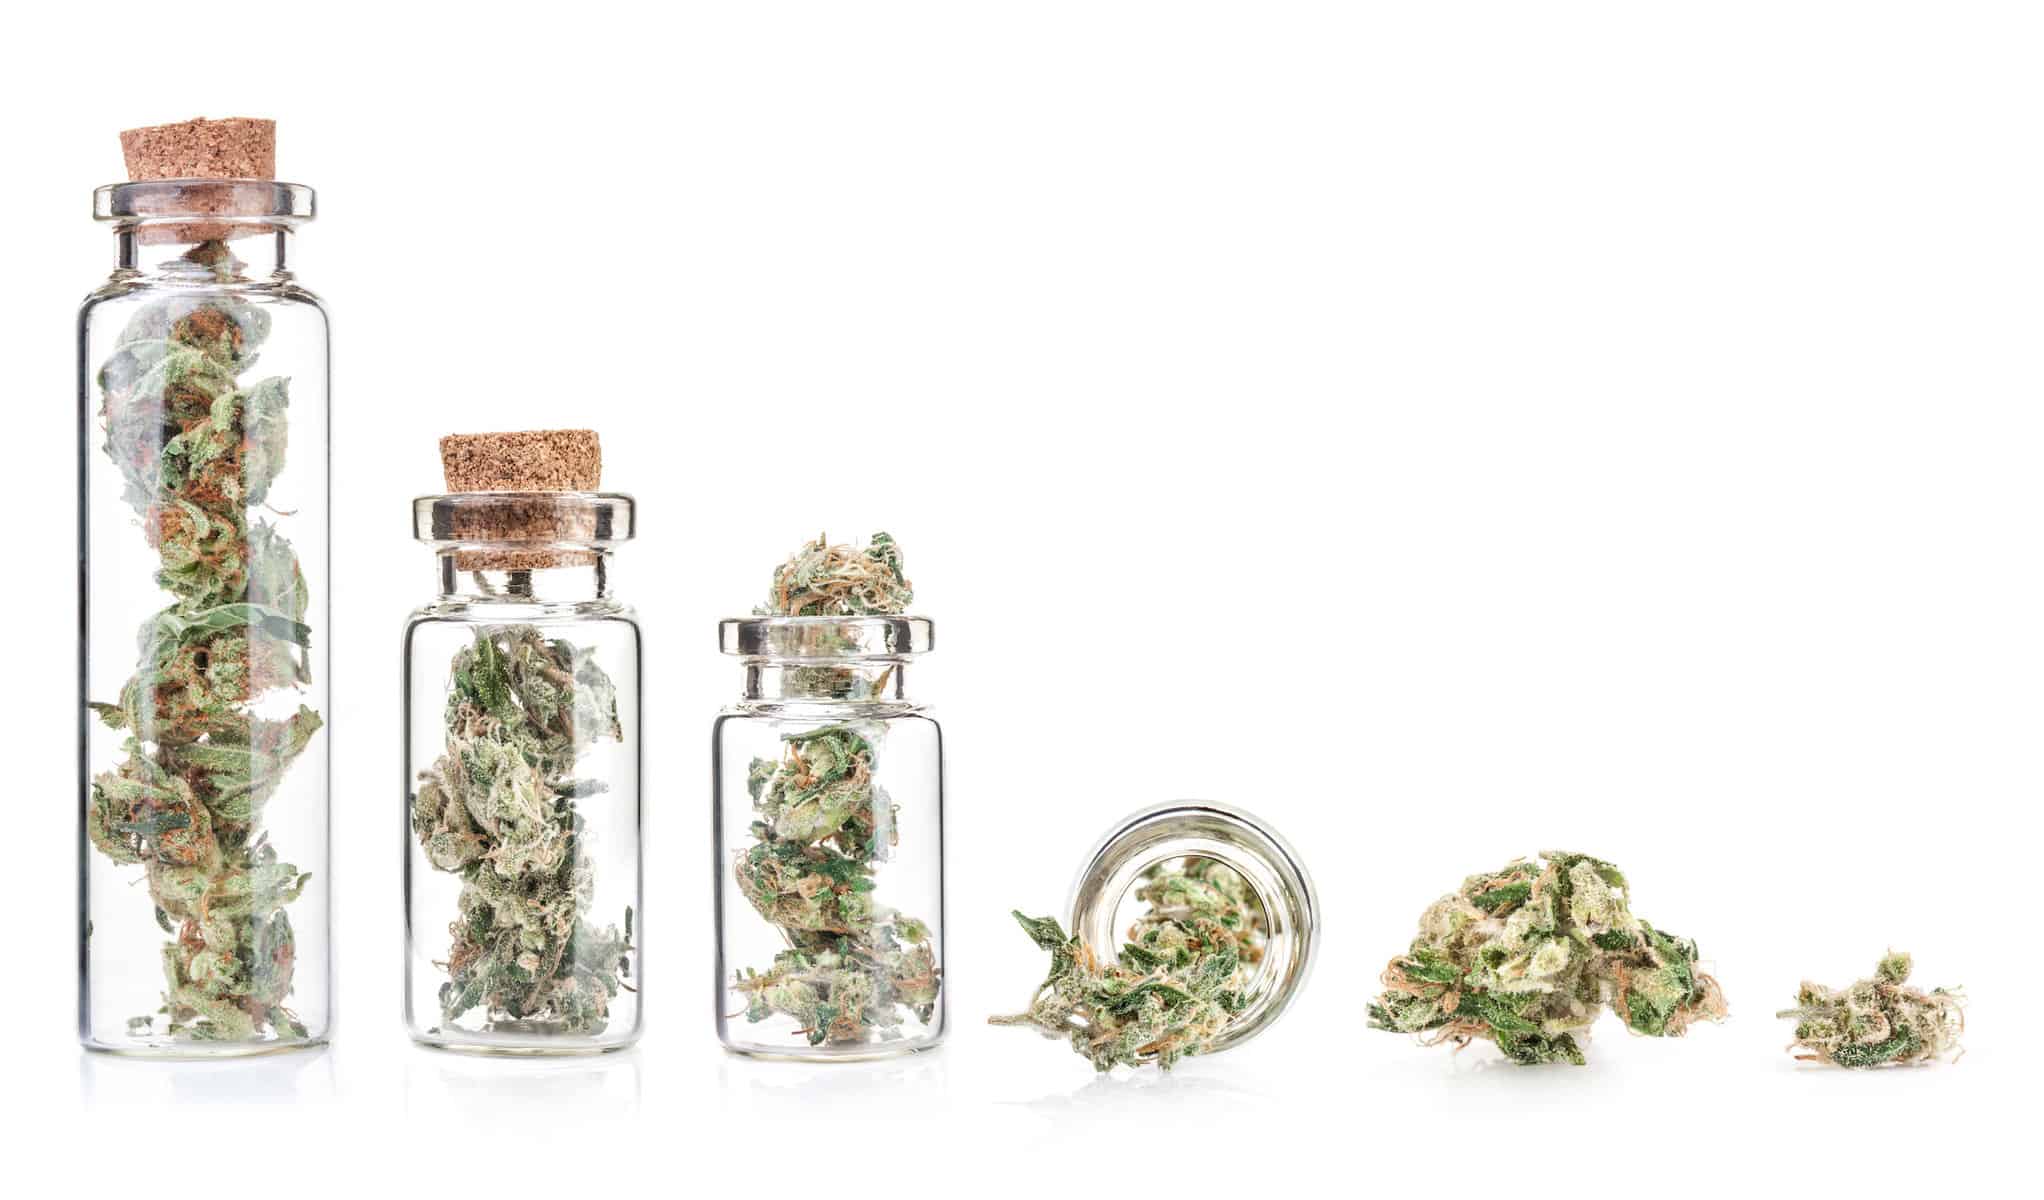 cannabis buds in glass jars isolated on white, best tasting cannabis strains